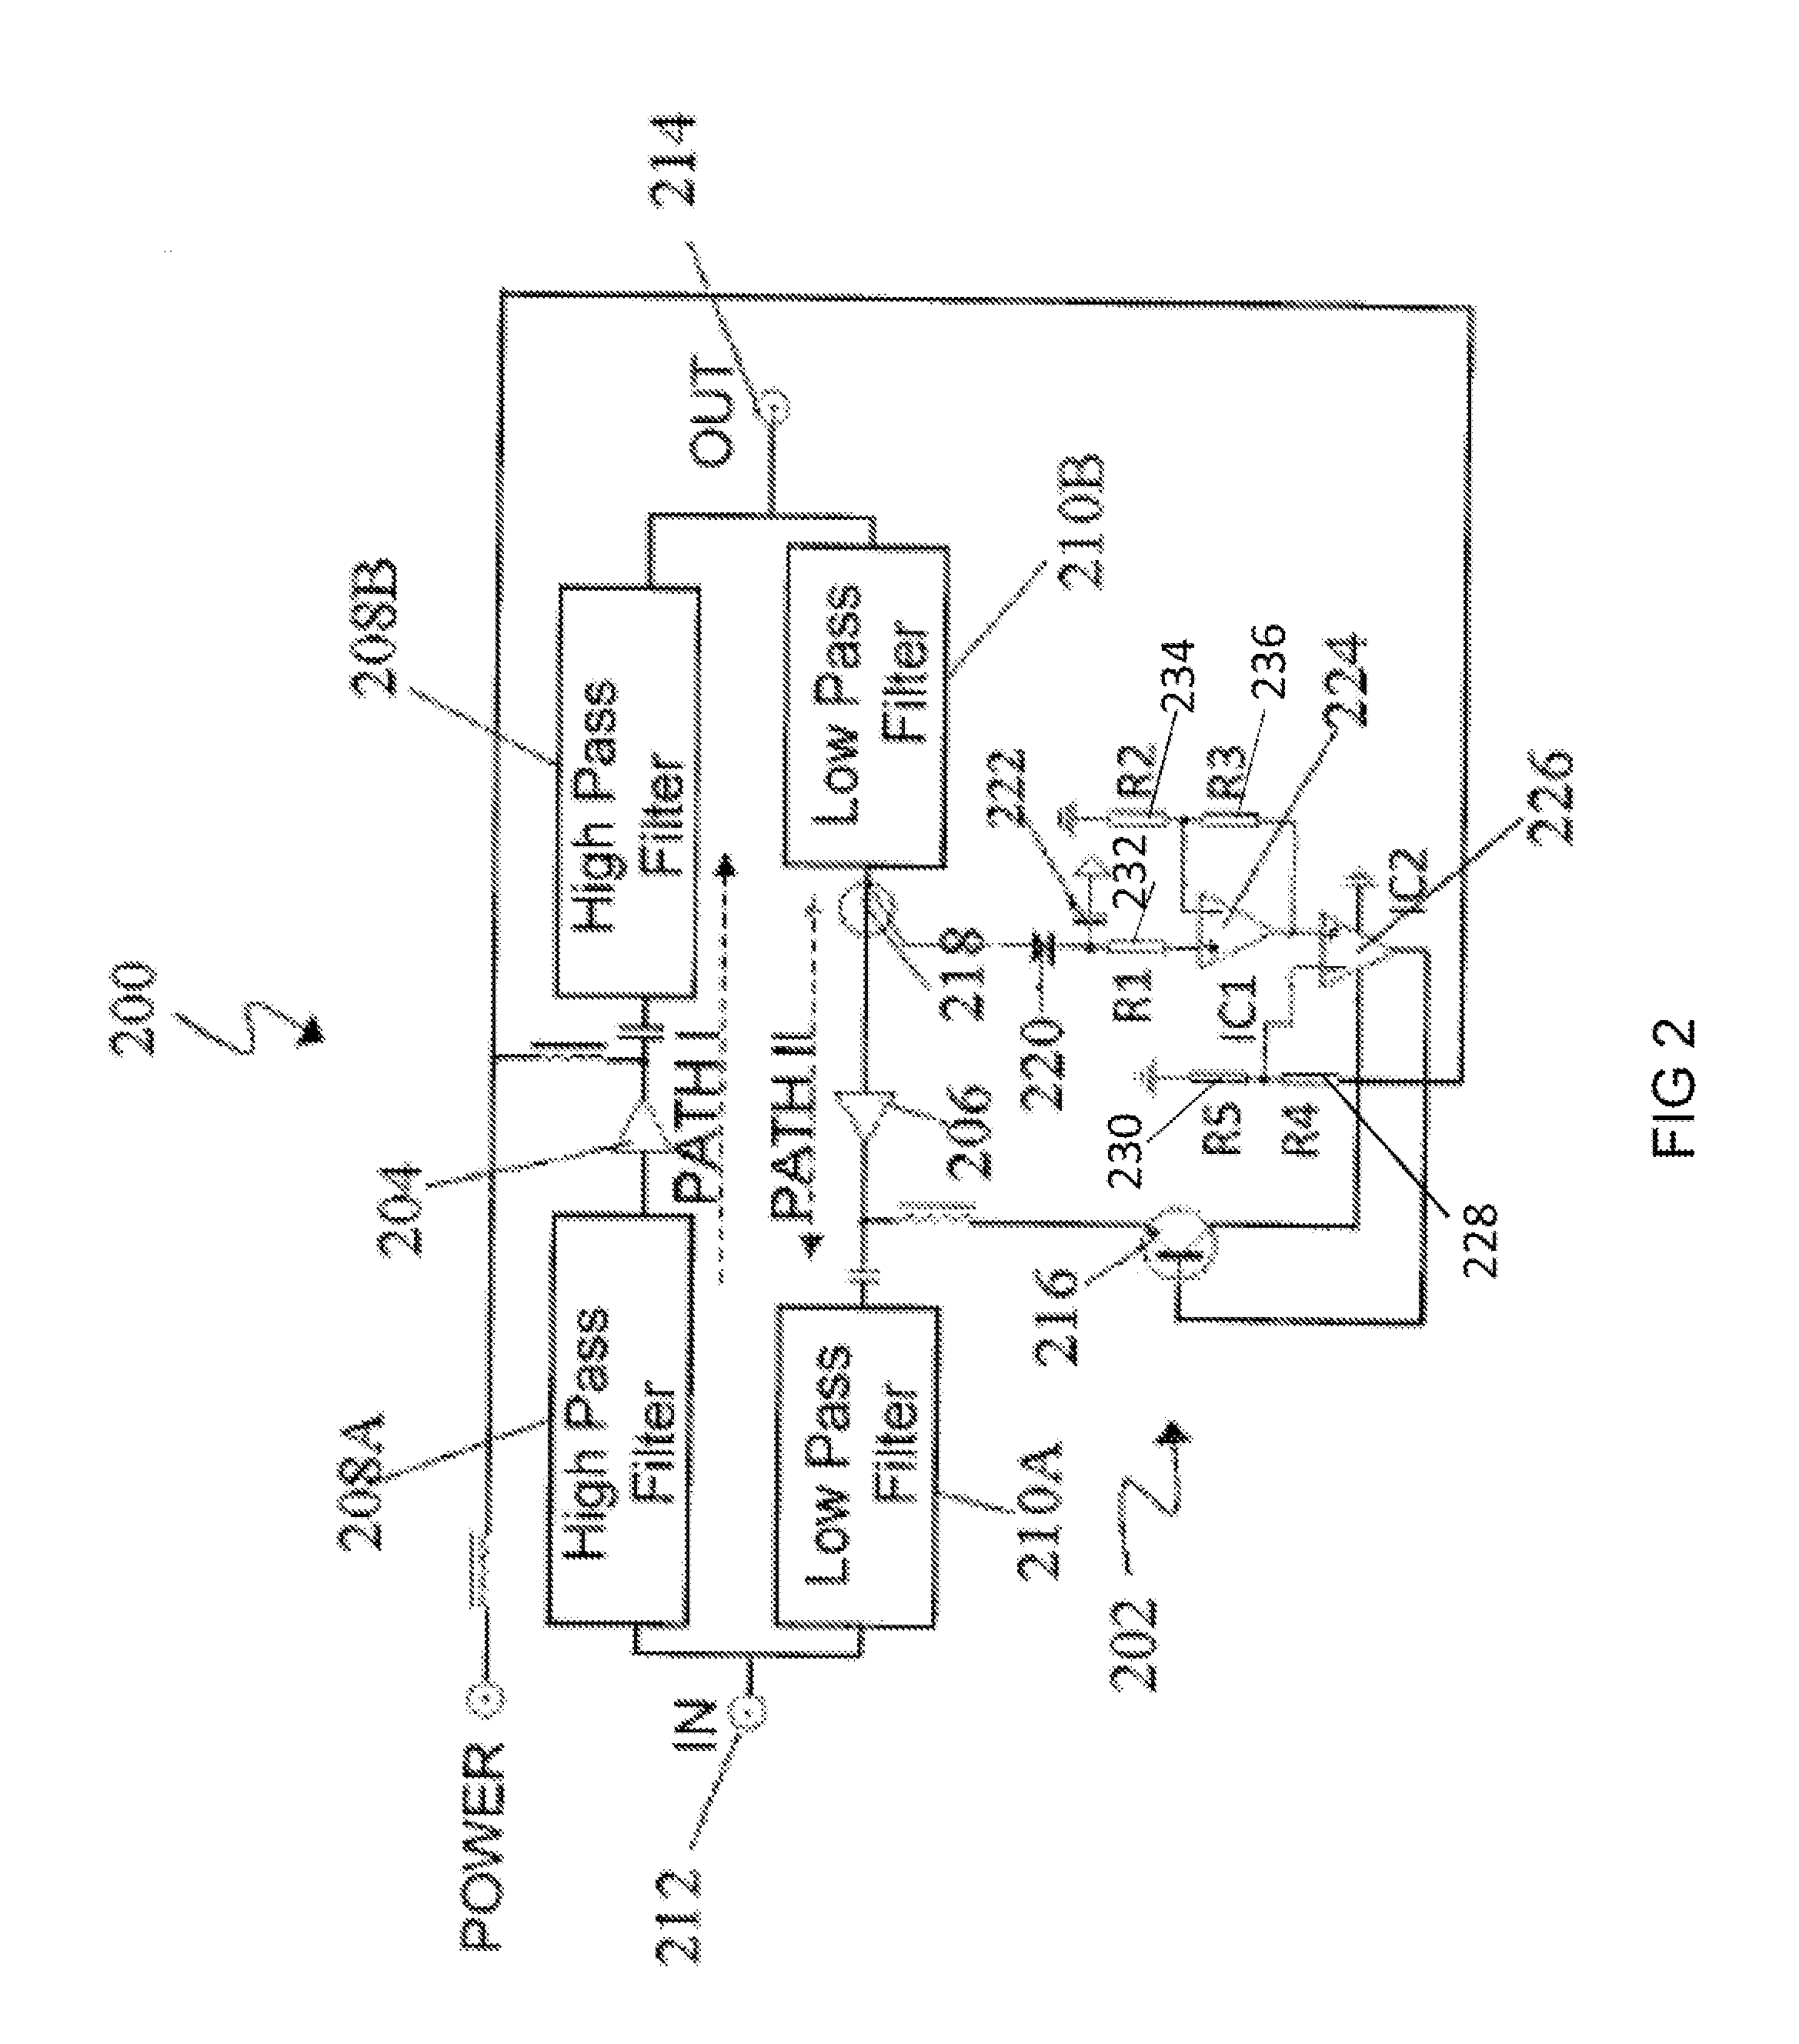 System for reducing return signal noise without radio frequency switching devices